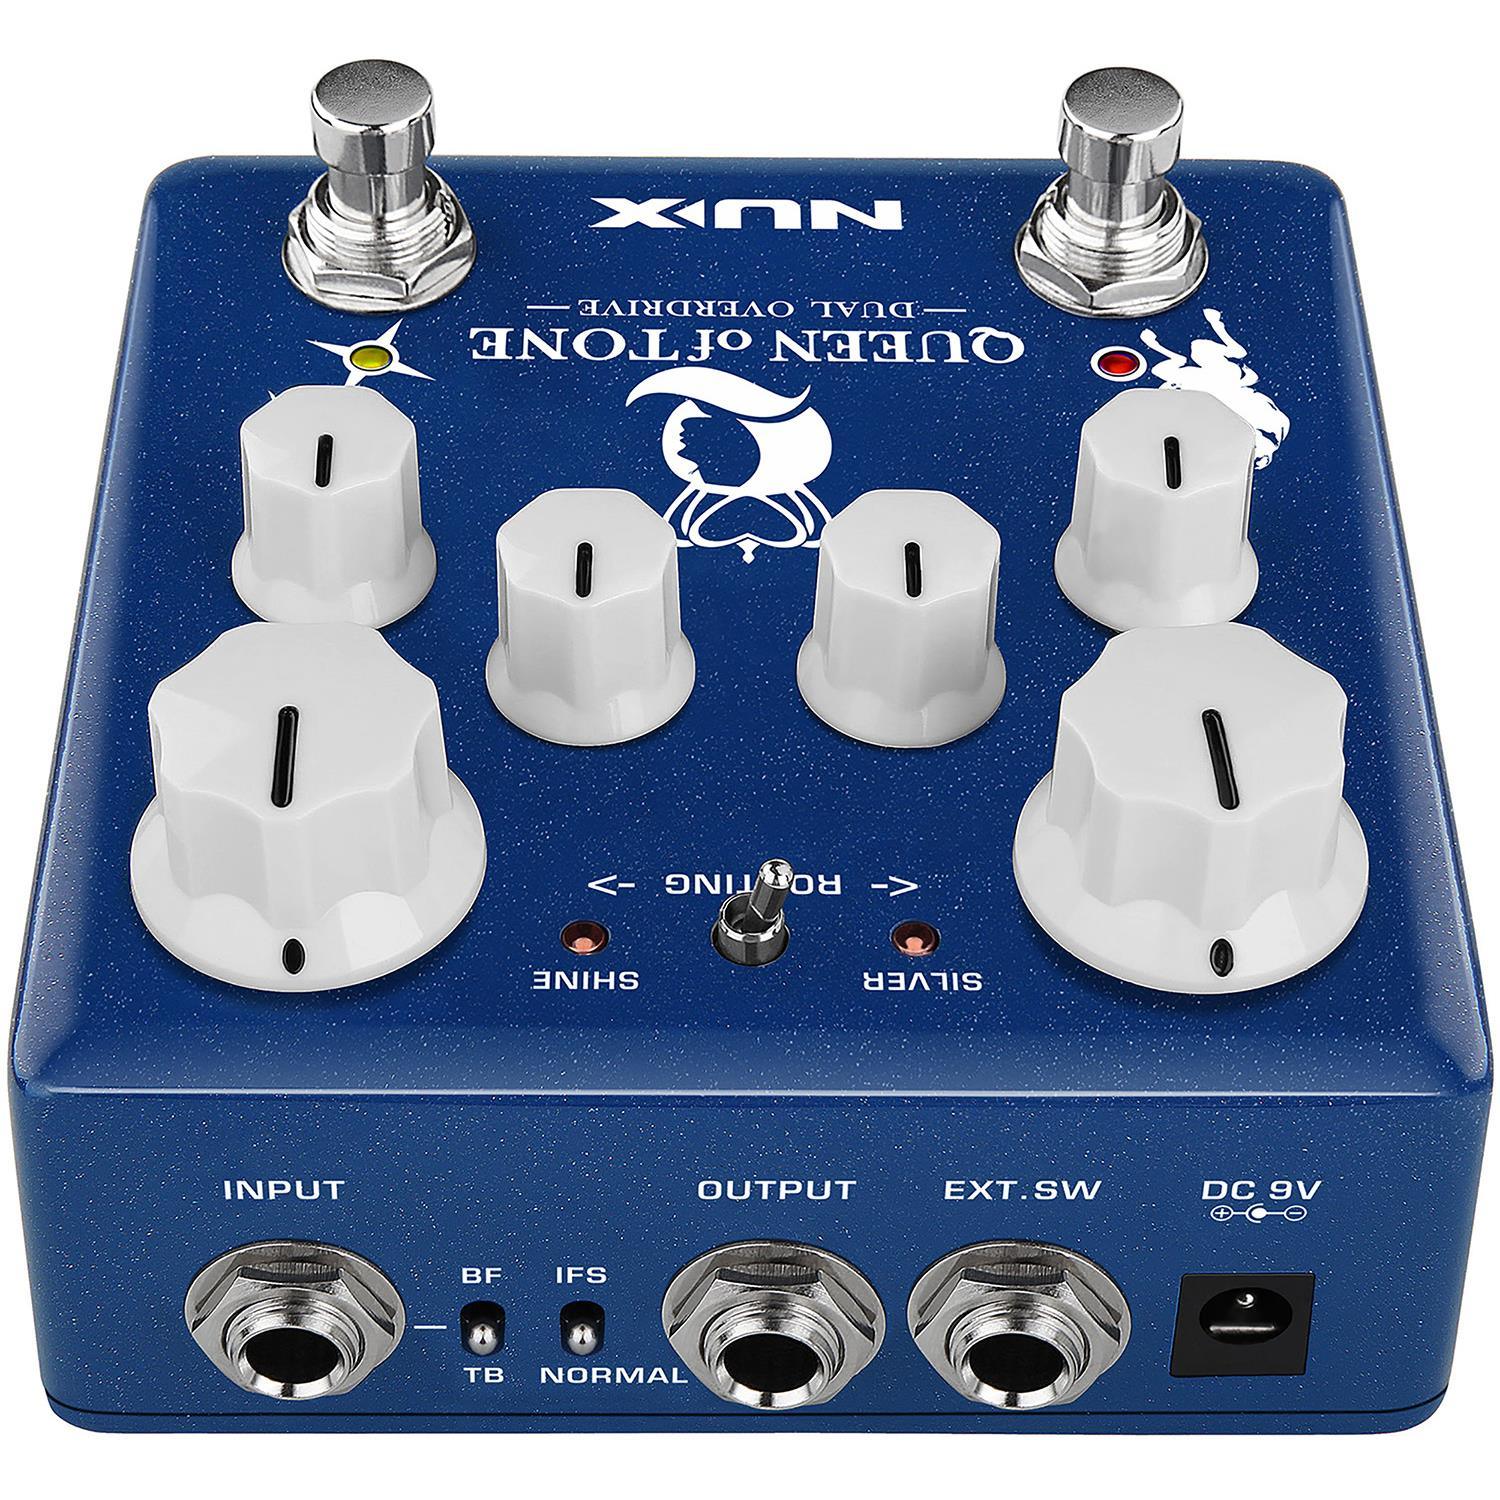 NUX Queen of Tone Dual Stacked Overdrive Pedal - DY Pro Audio